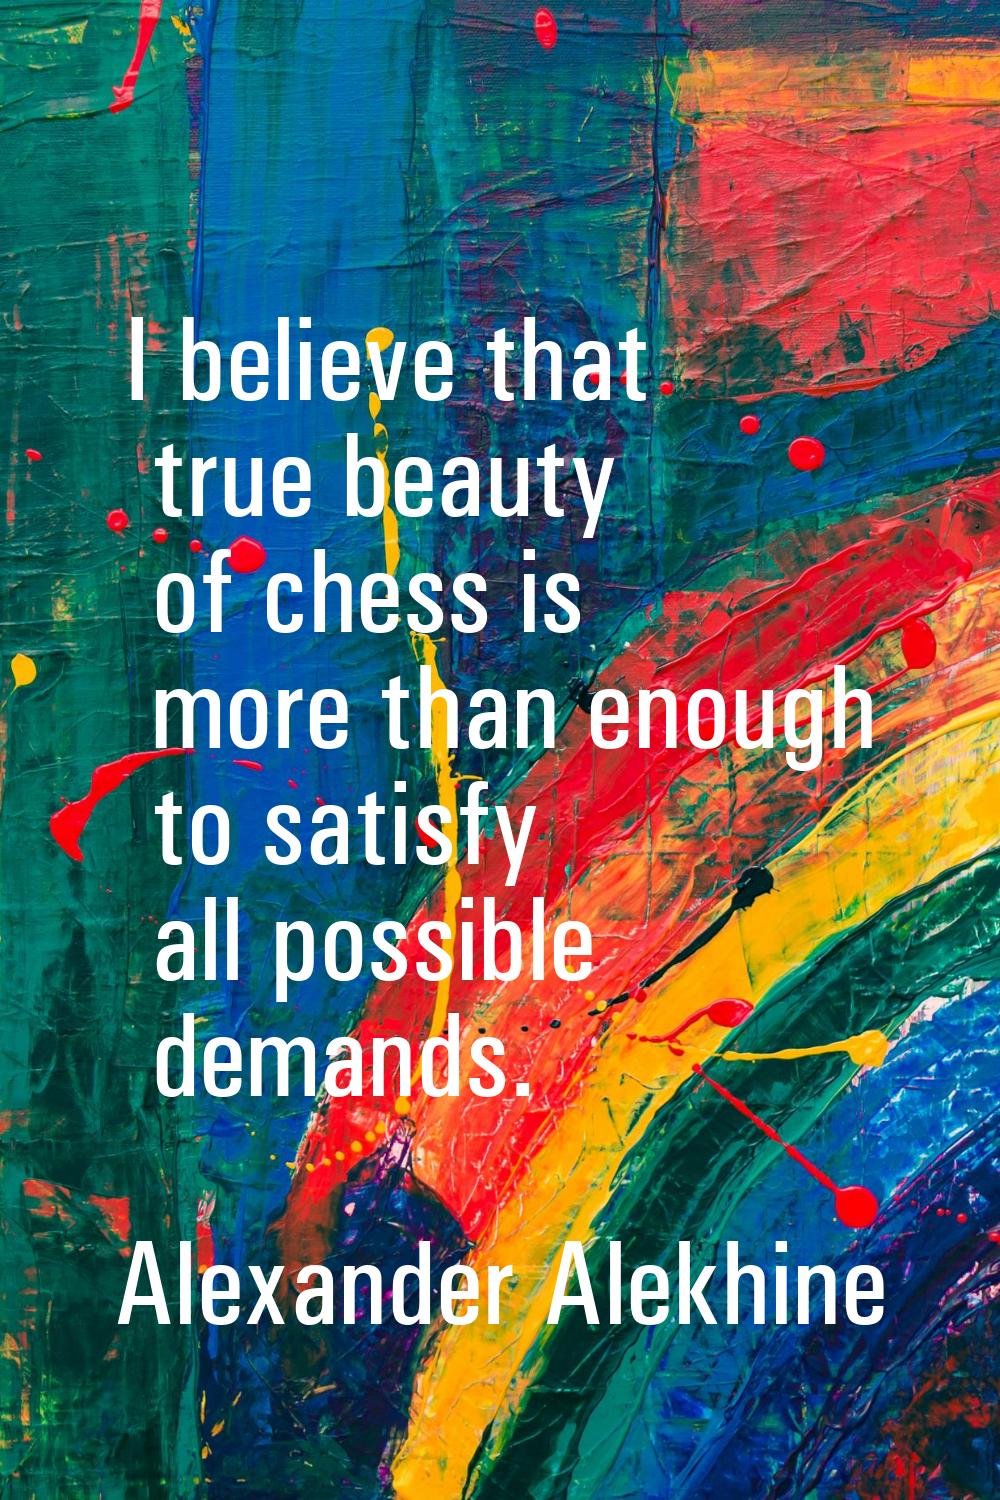 I believe that true beauty of chess is more than enough to satisfy all possible demands.